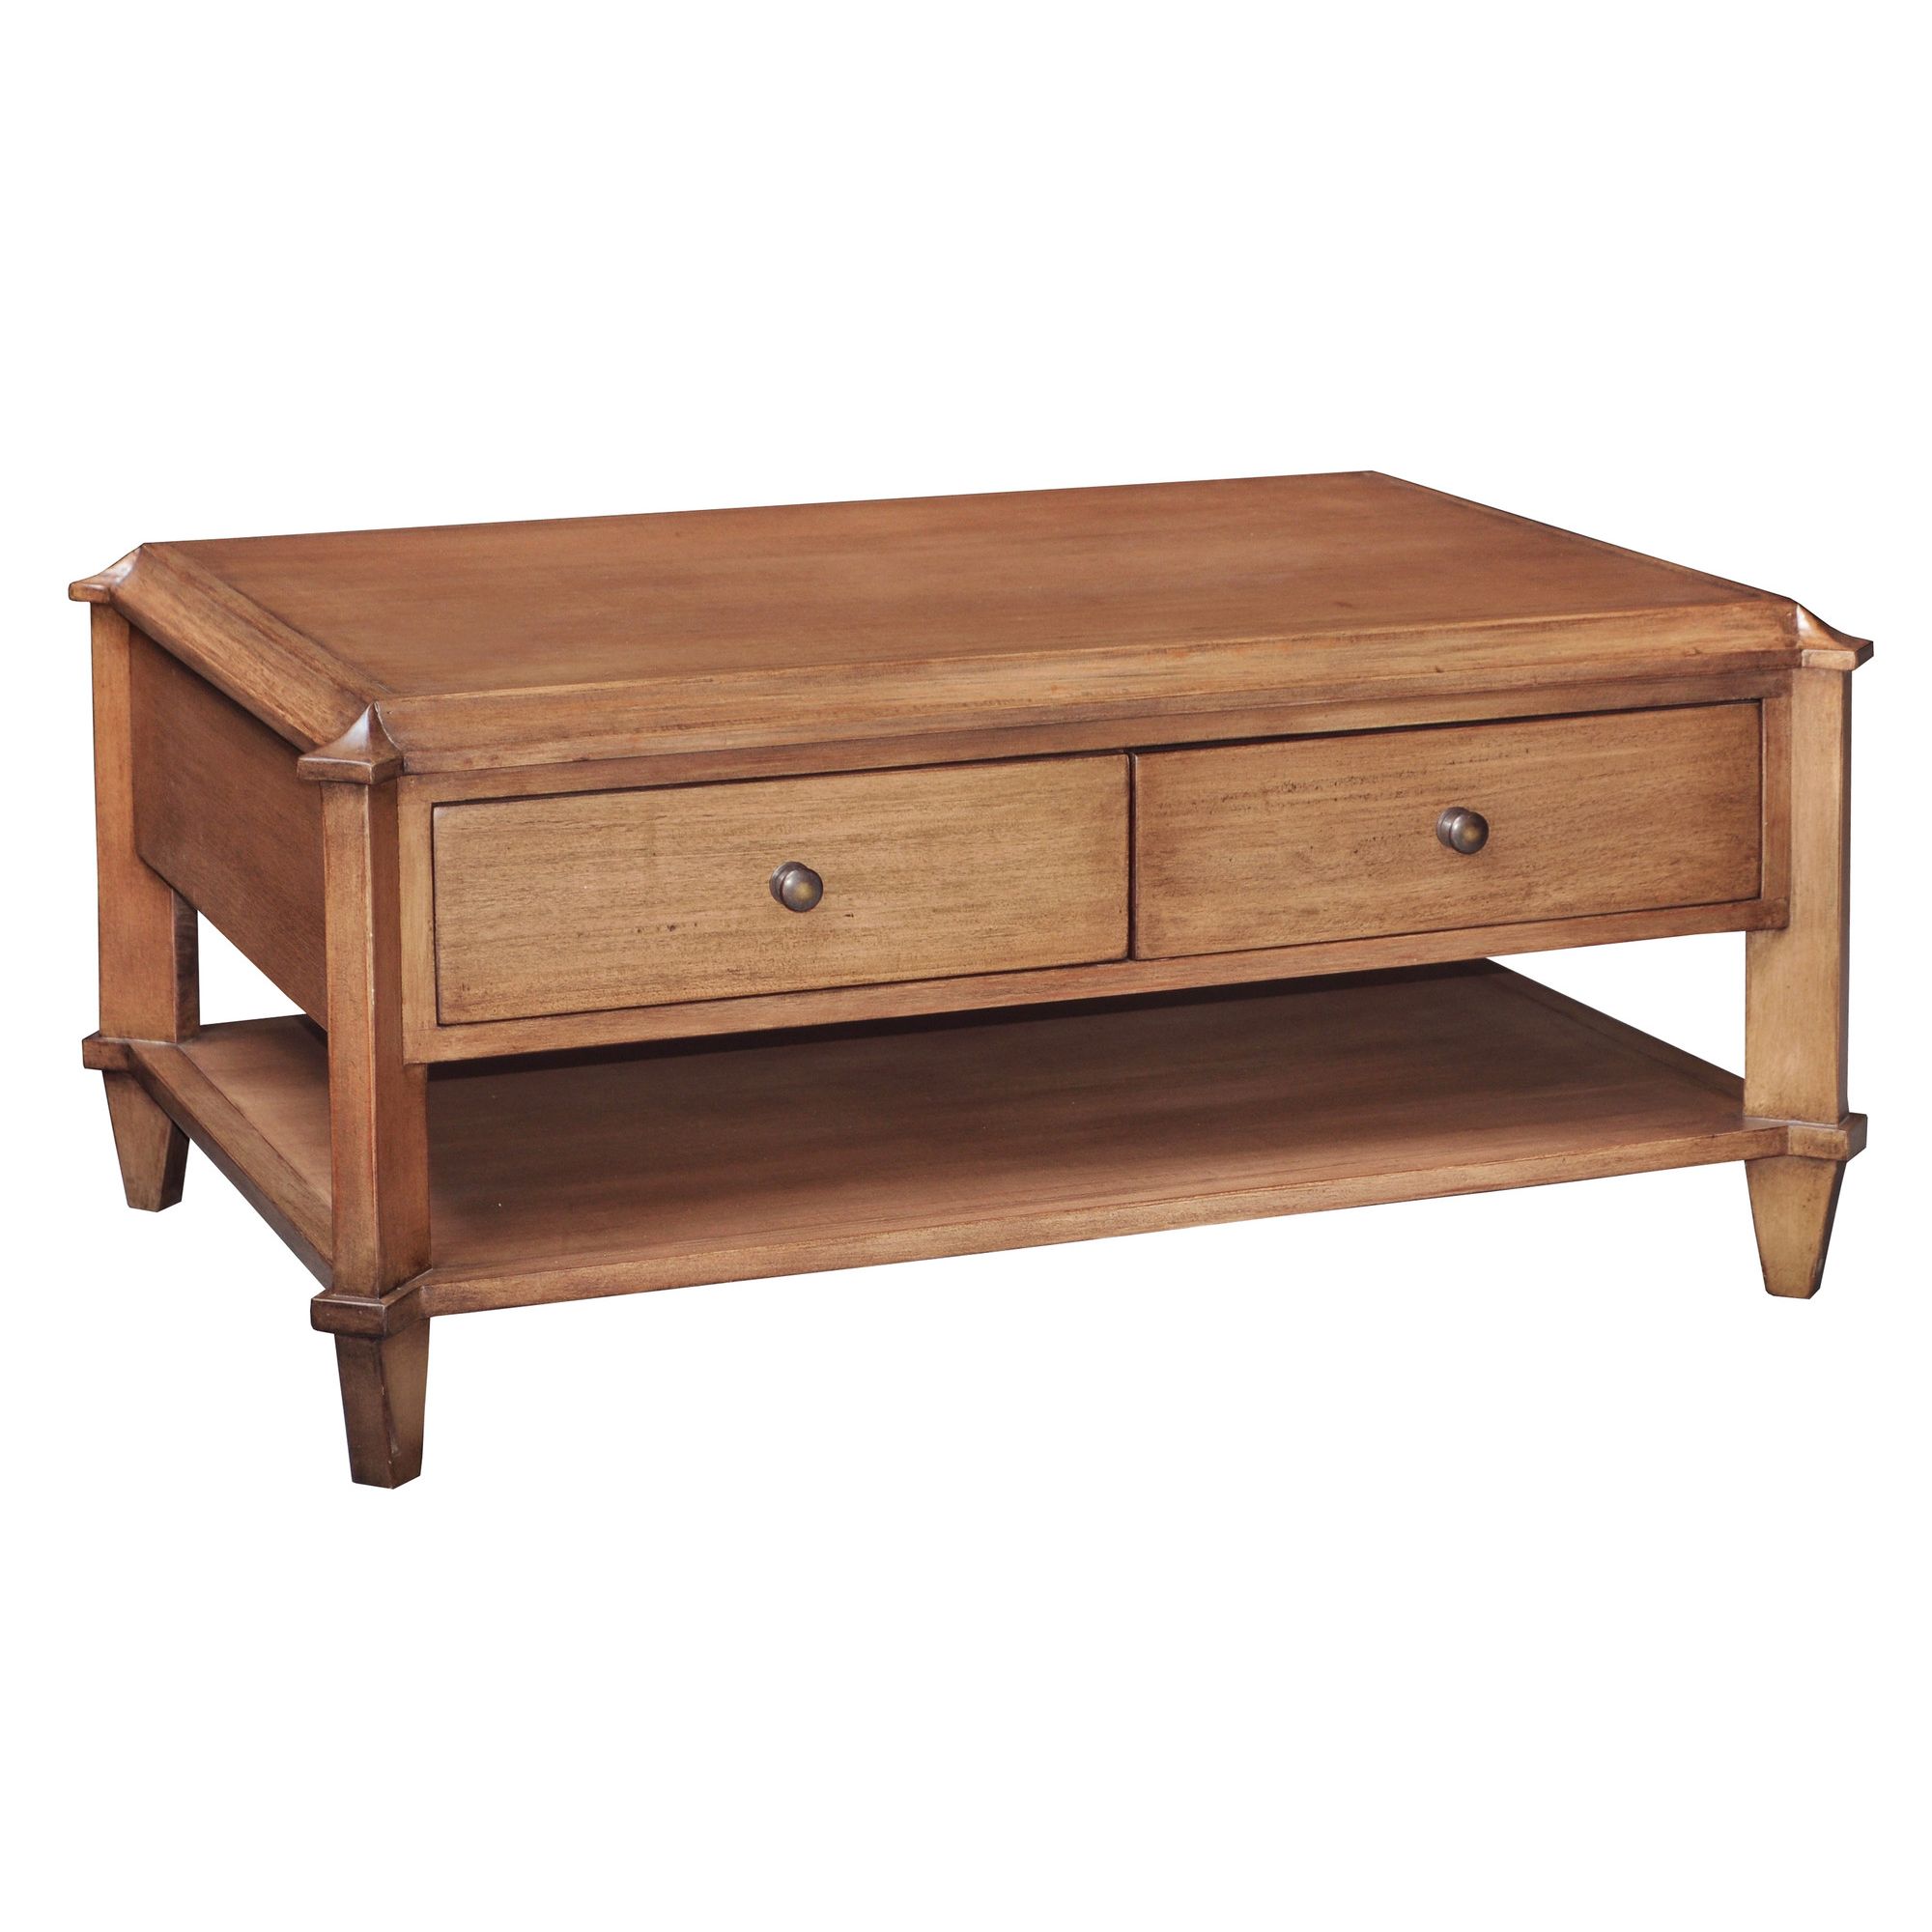 Lock stock and barrel Shell Knowle Coffee Table in Mahogany at Tesco Direct